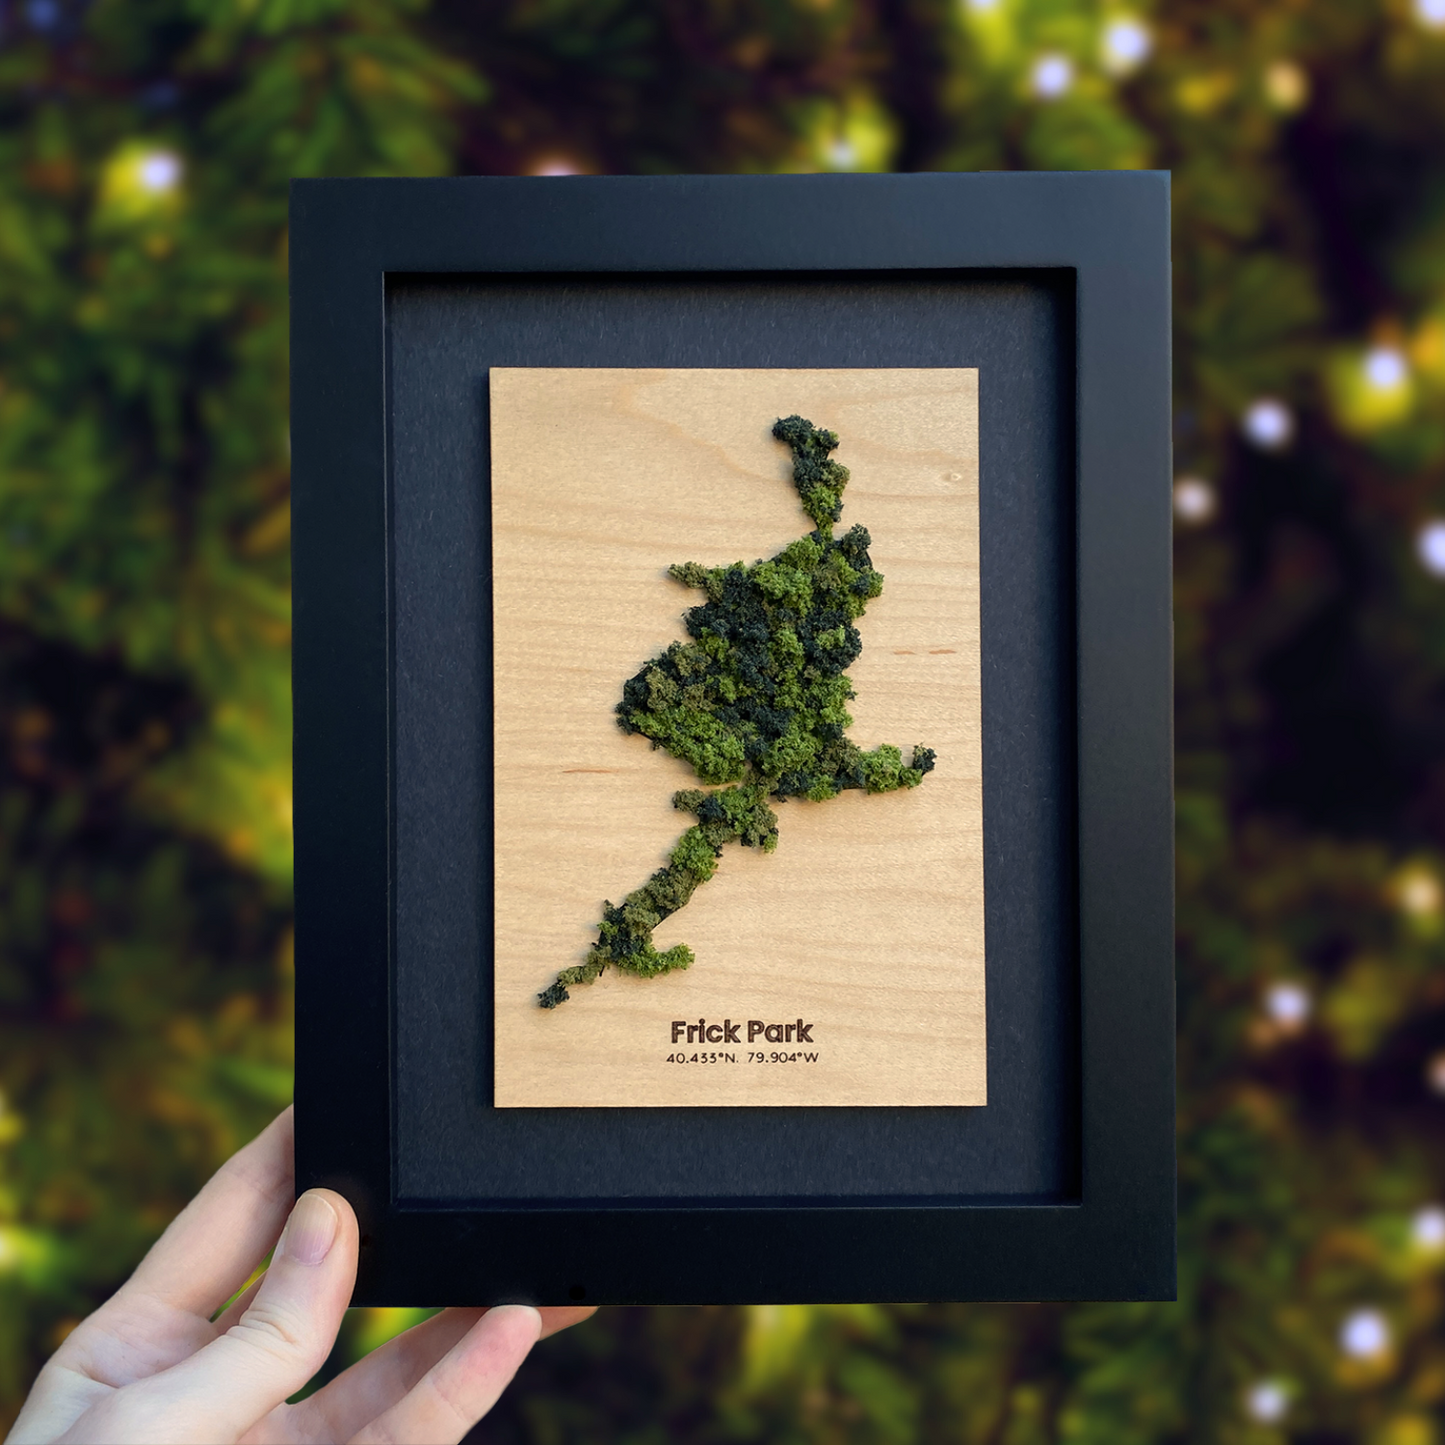 Handcrafted wood map of Frick Park made locally in Pittsburgh by LGBTQ woman owned small business